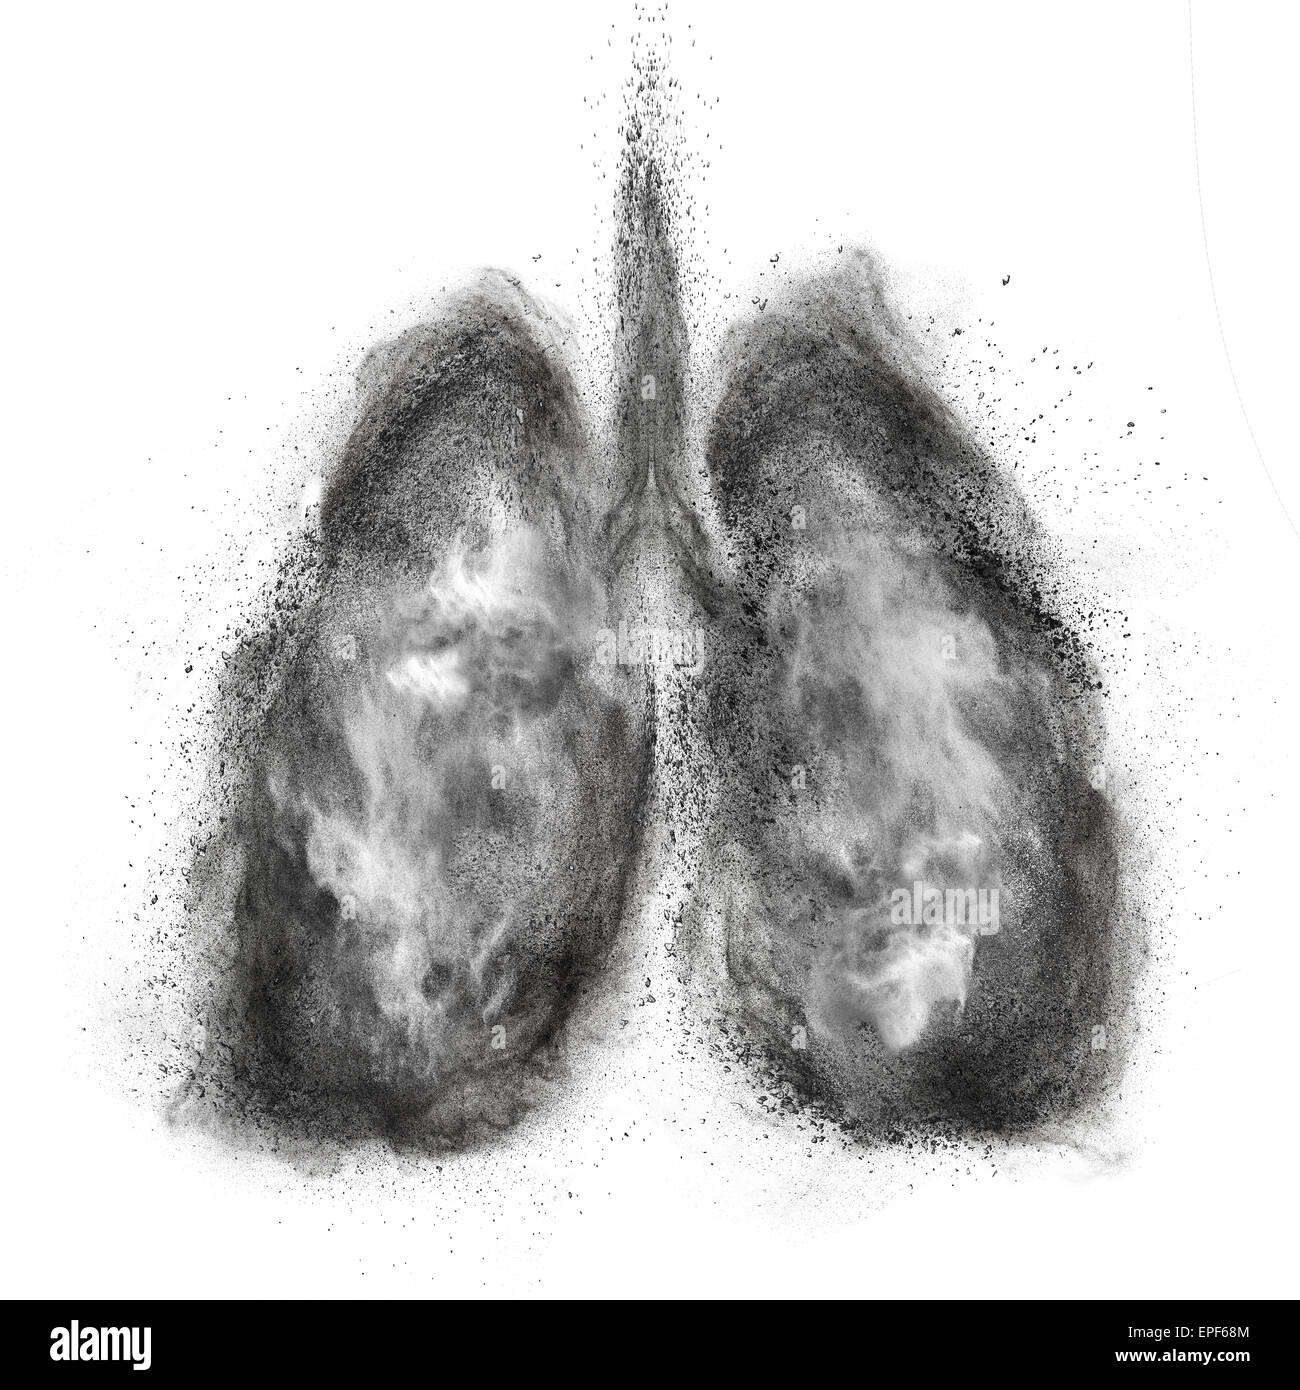 Lungs made of black powder explosion isolated on white Stock Photo